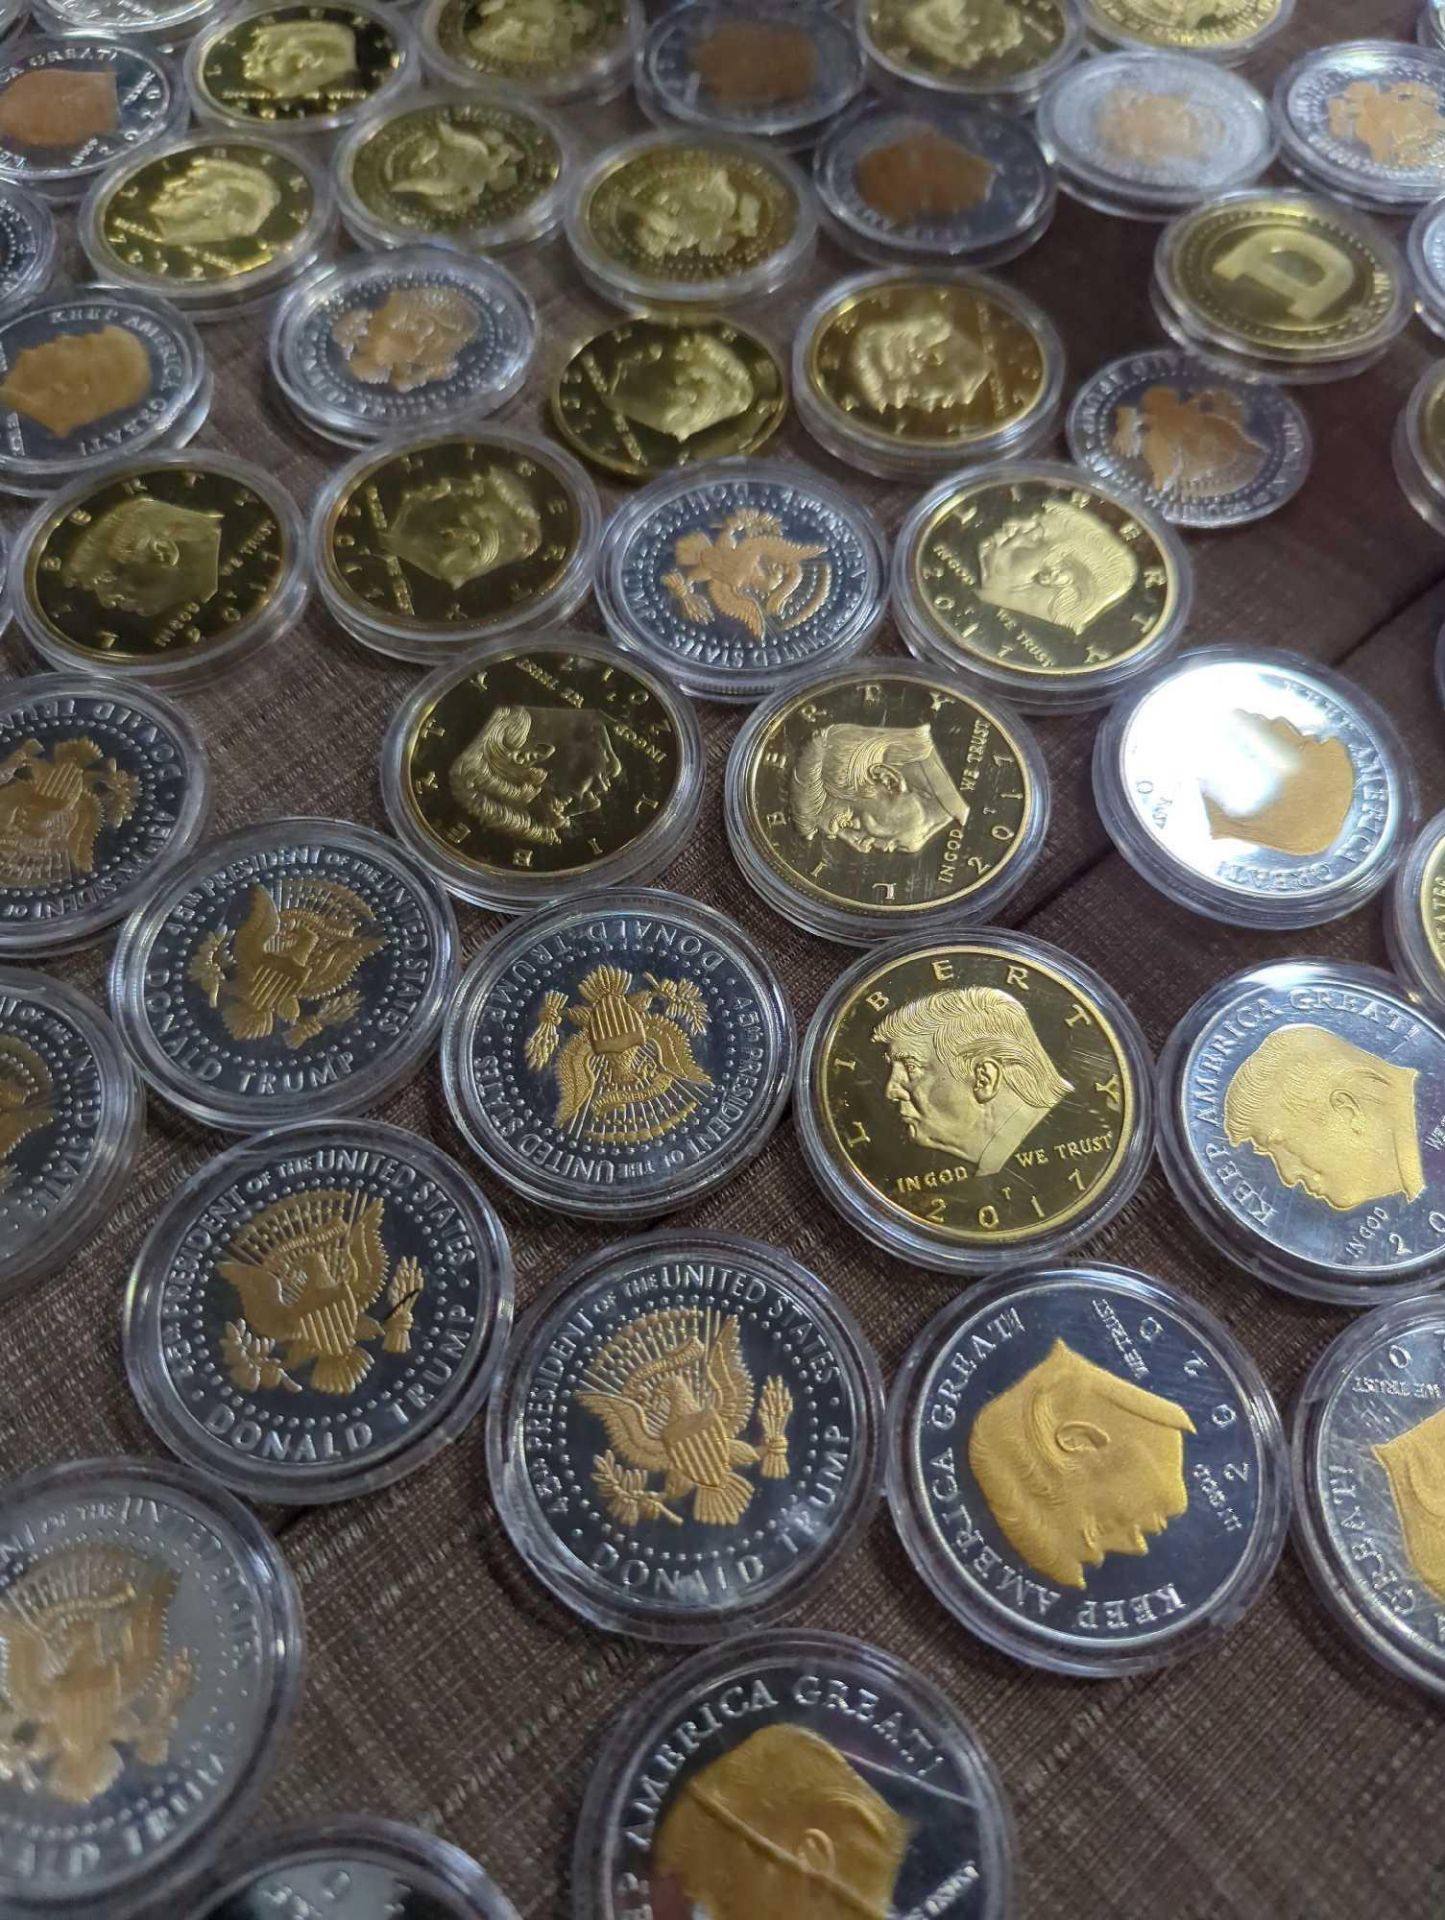 multiple commemorative Trump coins Doge coins and bitcoins - Image 7 of 7